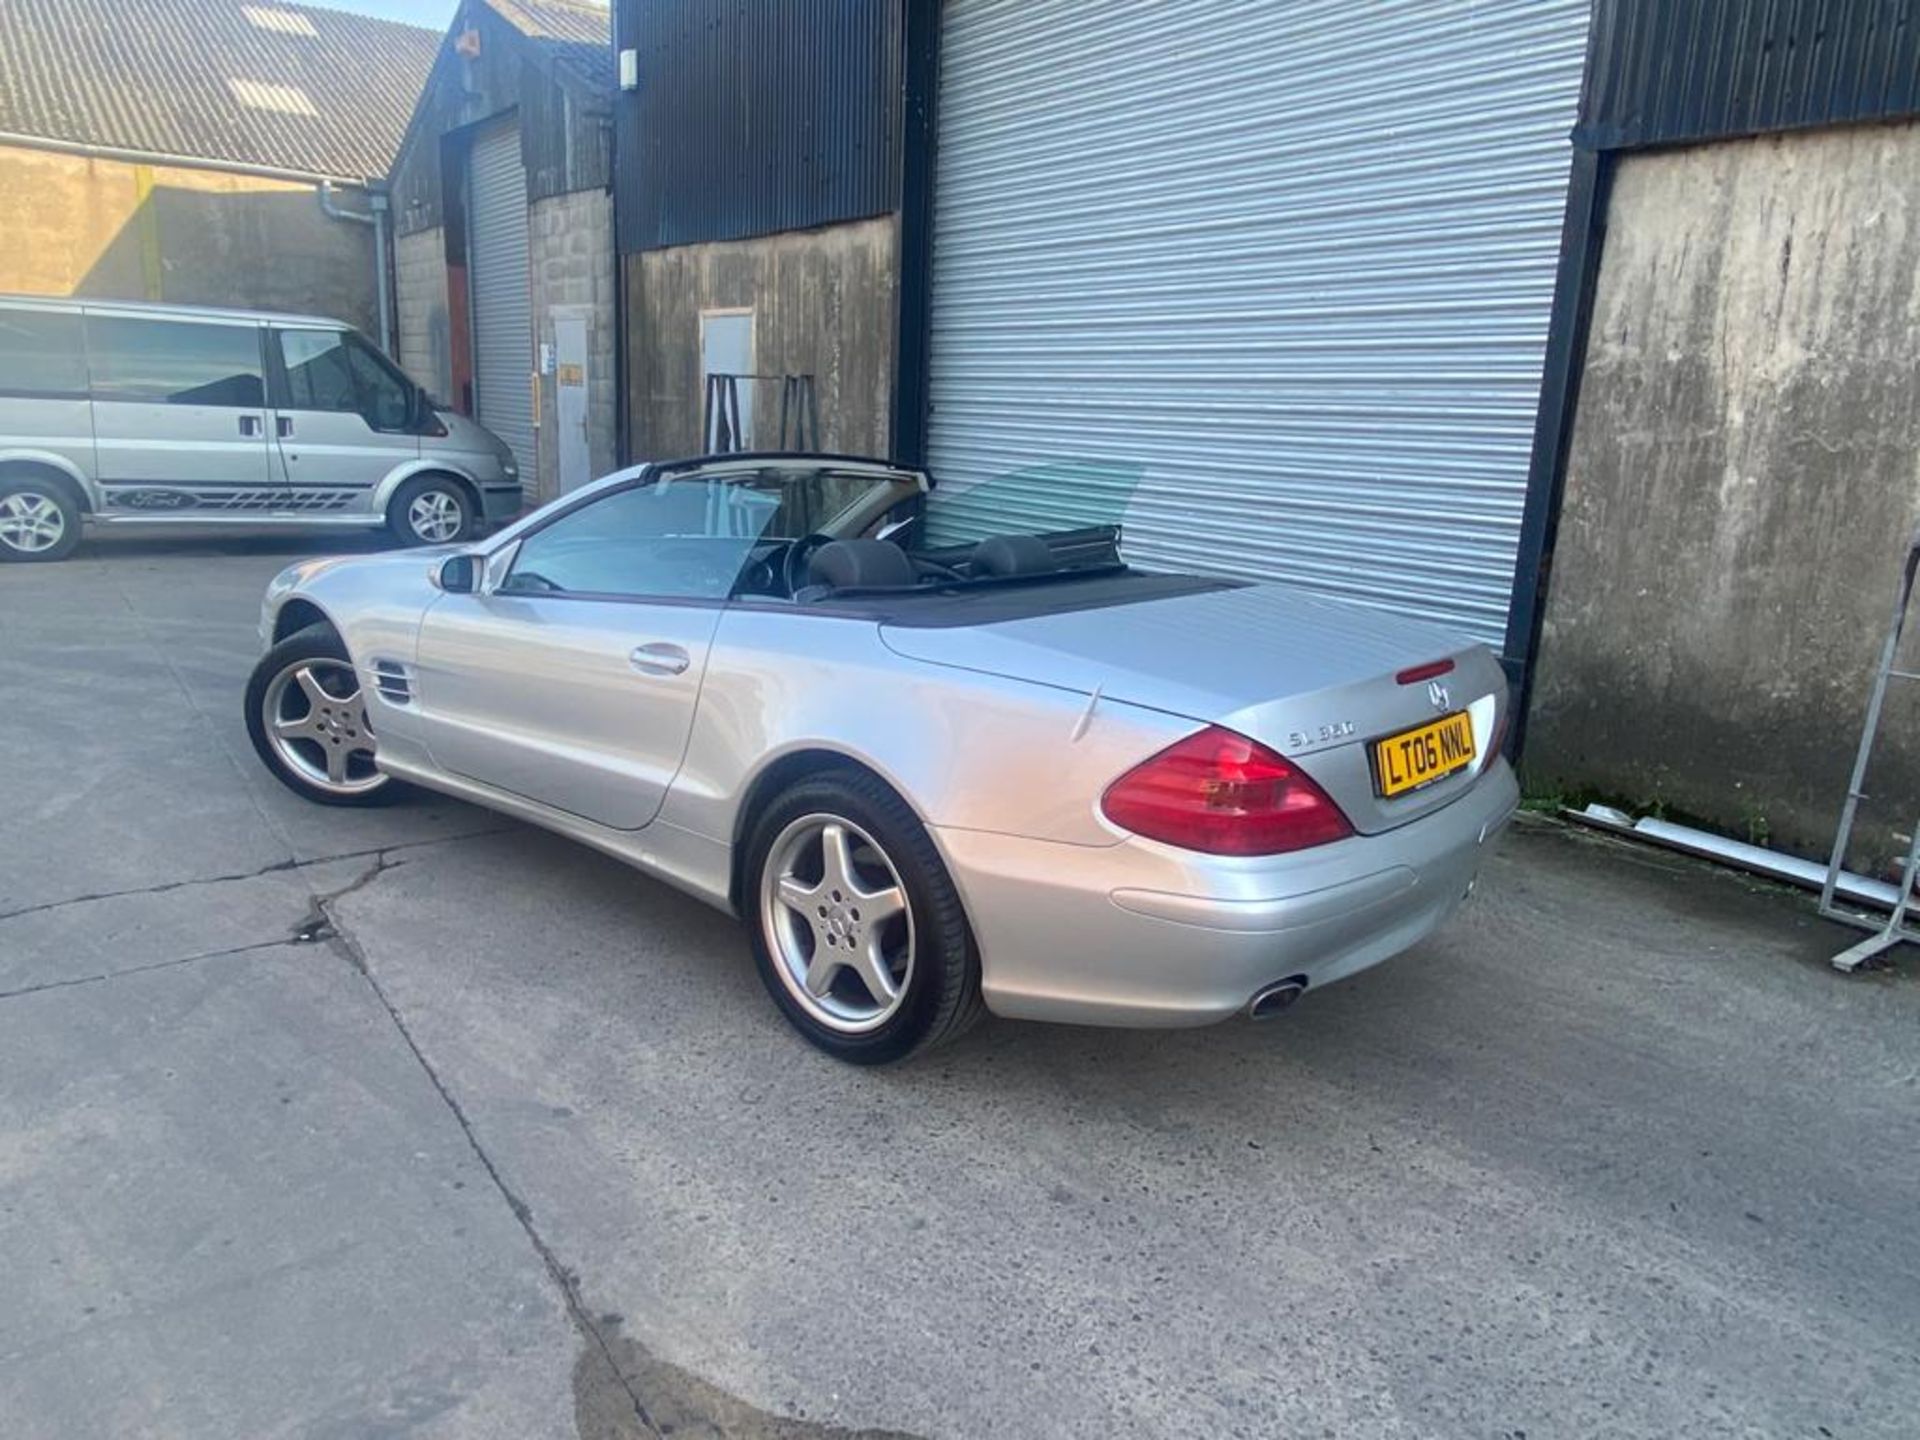 MERCEDES CONVERTIBLE 350 SL 2006 - Image 3 of 16